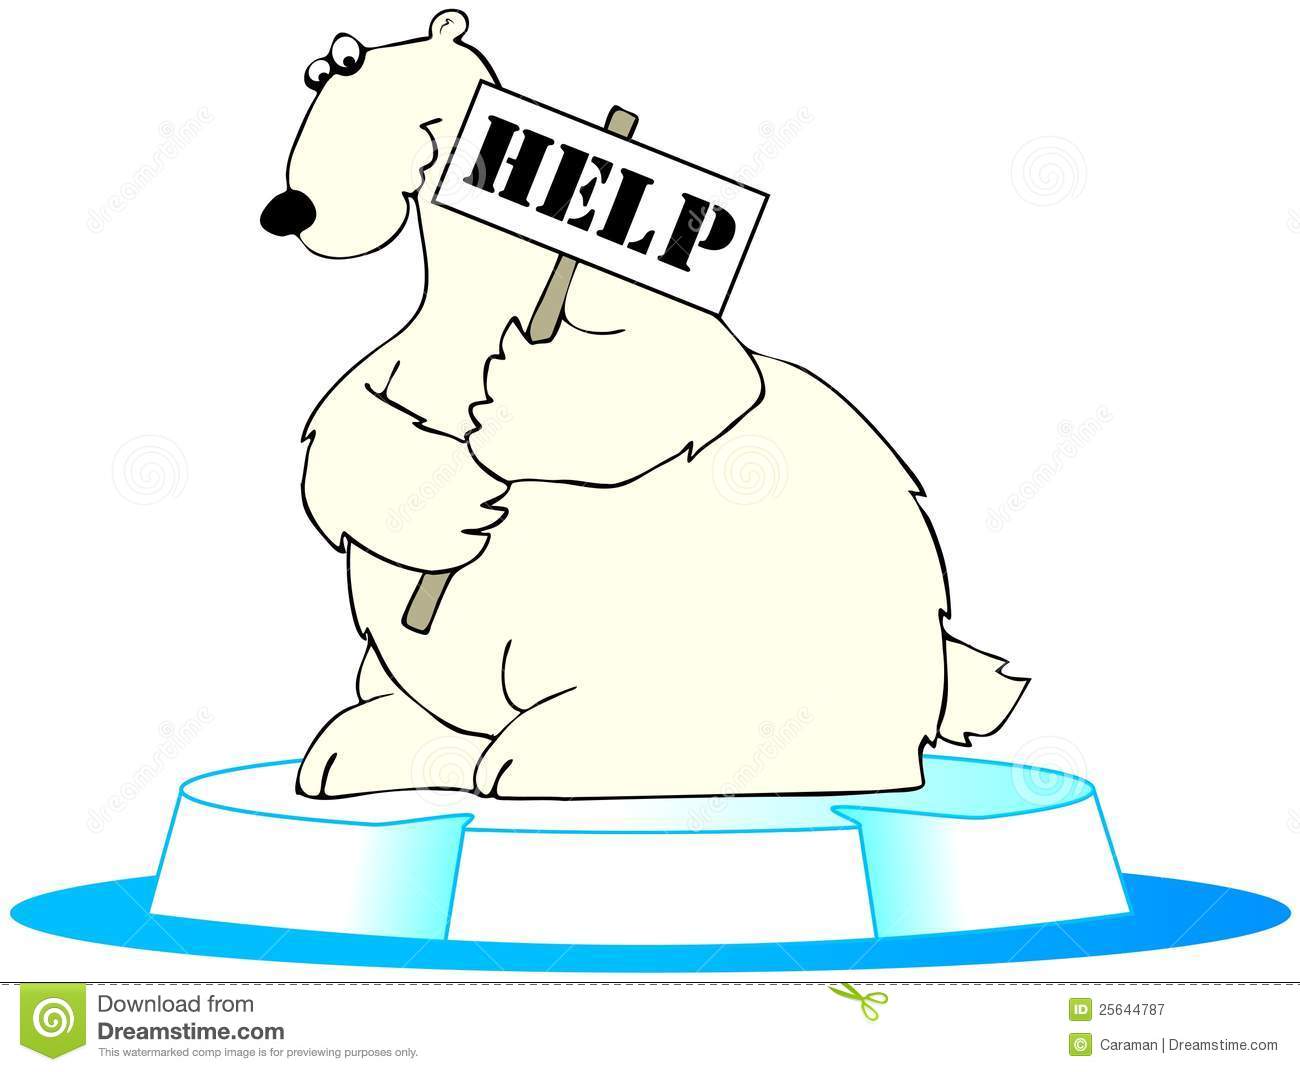 Polar Bear In Trouble Royalty Free Stock Photography   Image  25644787